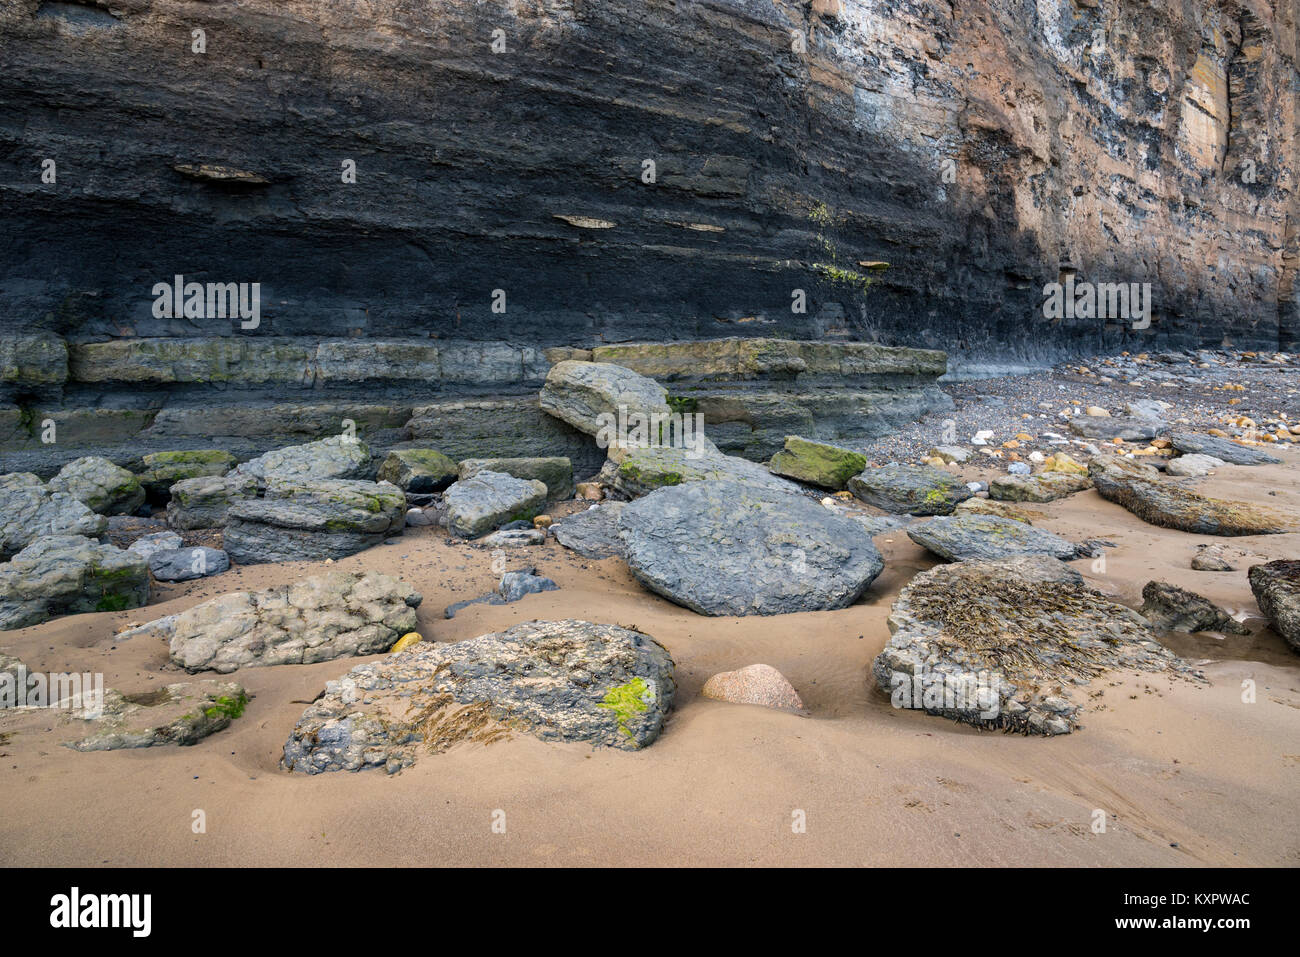 High cliffs at Robin Hood's Bay, North Yorkshire. An area known for its interesting geology and fossils. Stock Photo